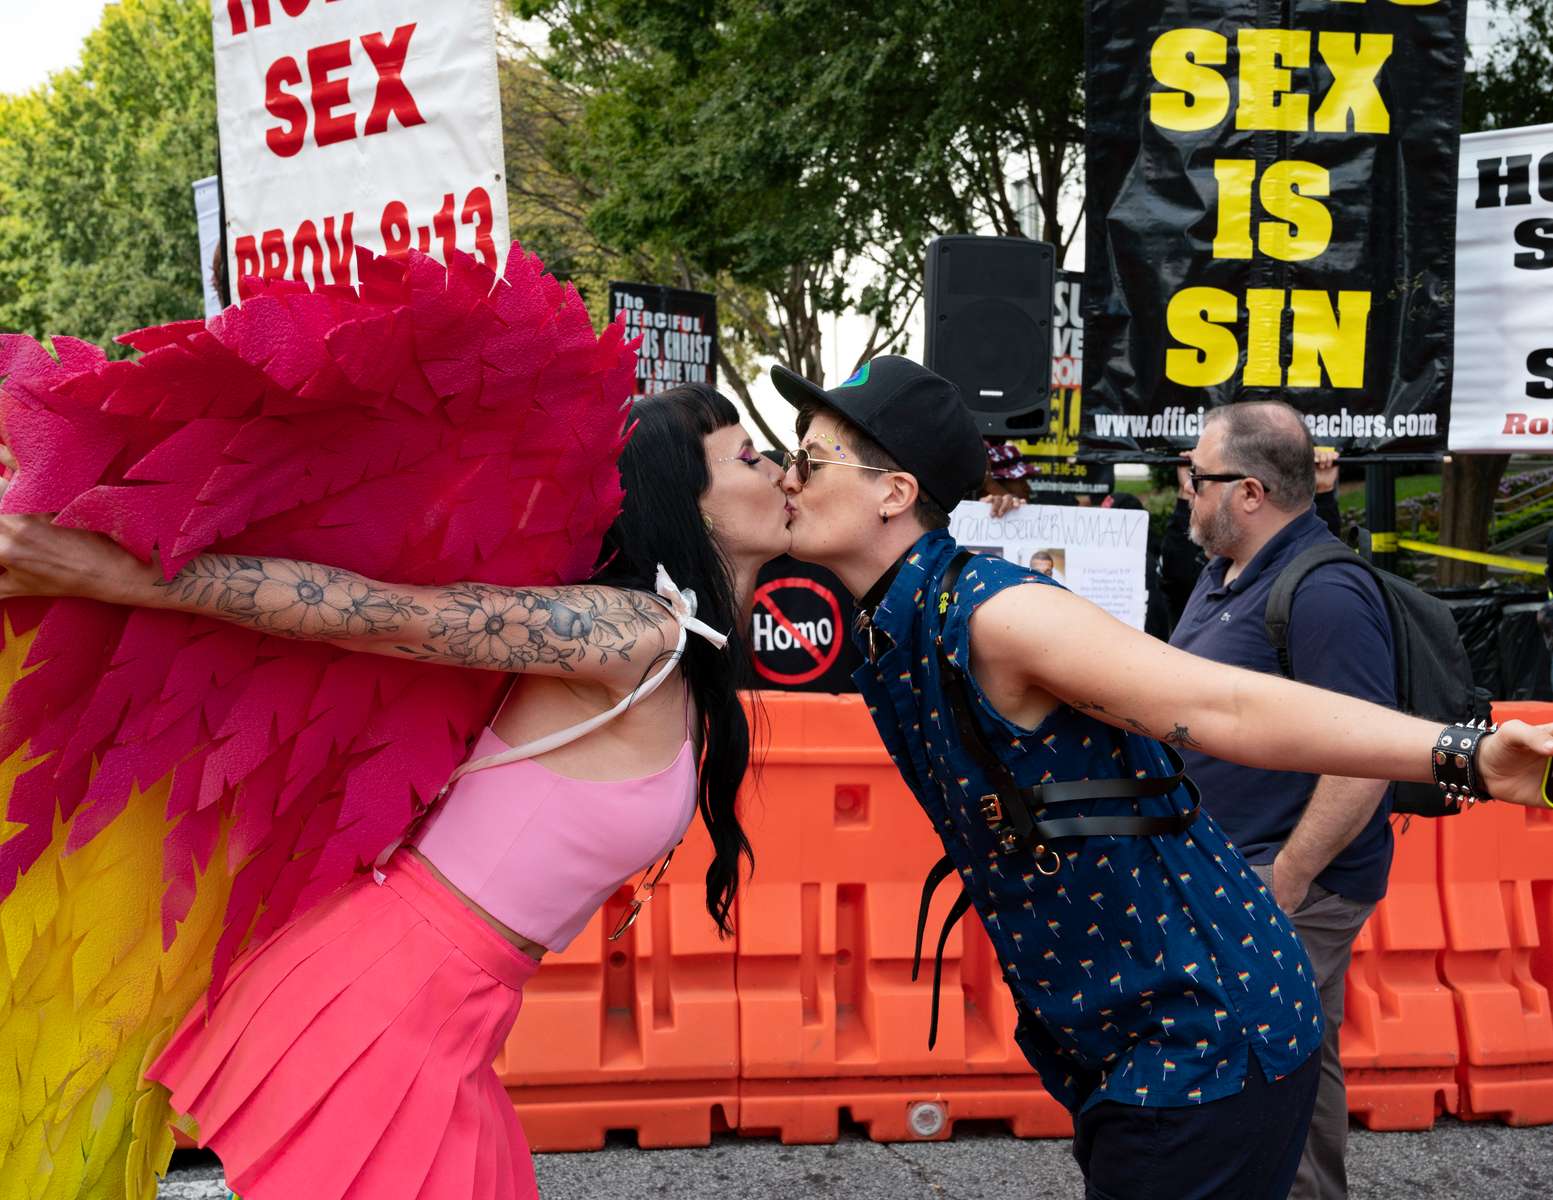 Thousands from Atlanta’s LGBTQ community  jammed the city’s midtown district for the 3-hour-long Pride parade, after a two-year hiatus because of COVID-19. Pictured: A lesbian couple kiss as street preachers behind them taunt and insult the crowd.